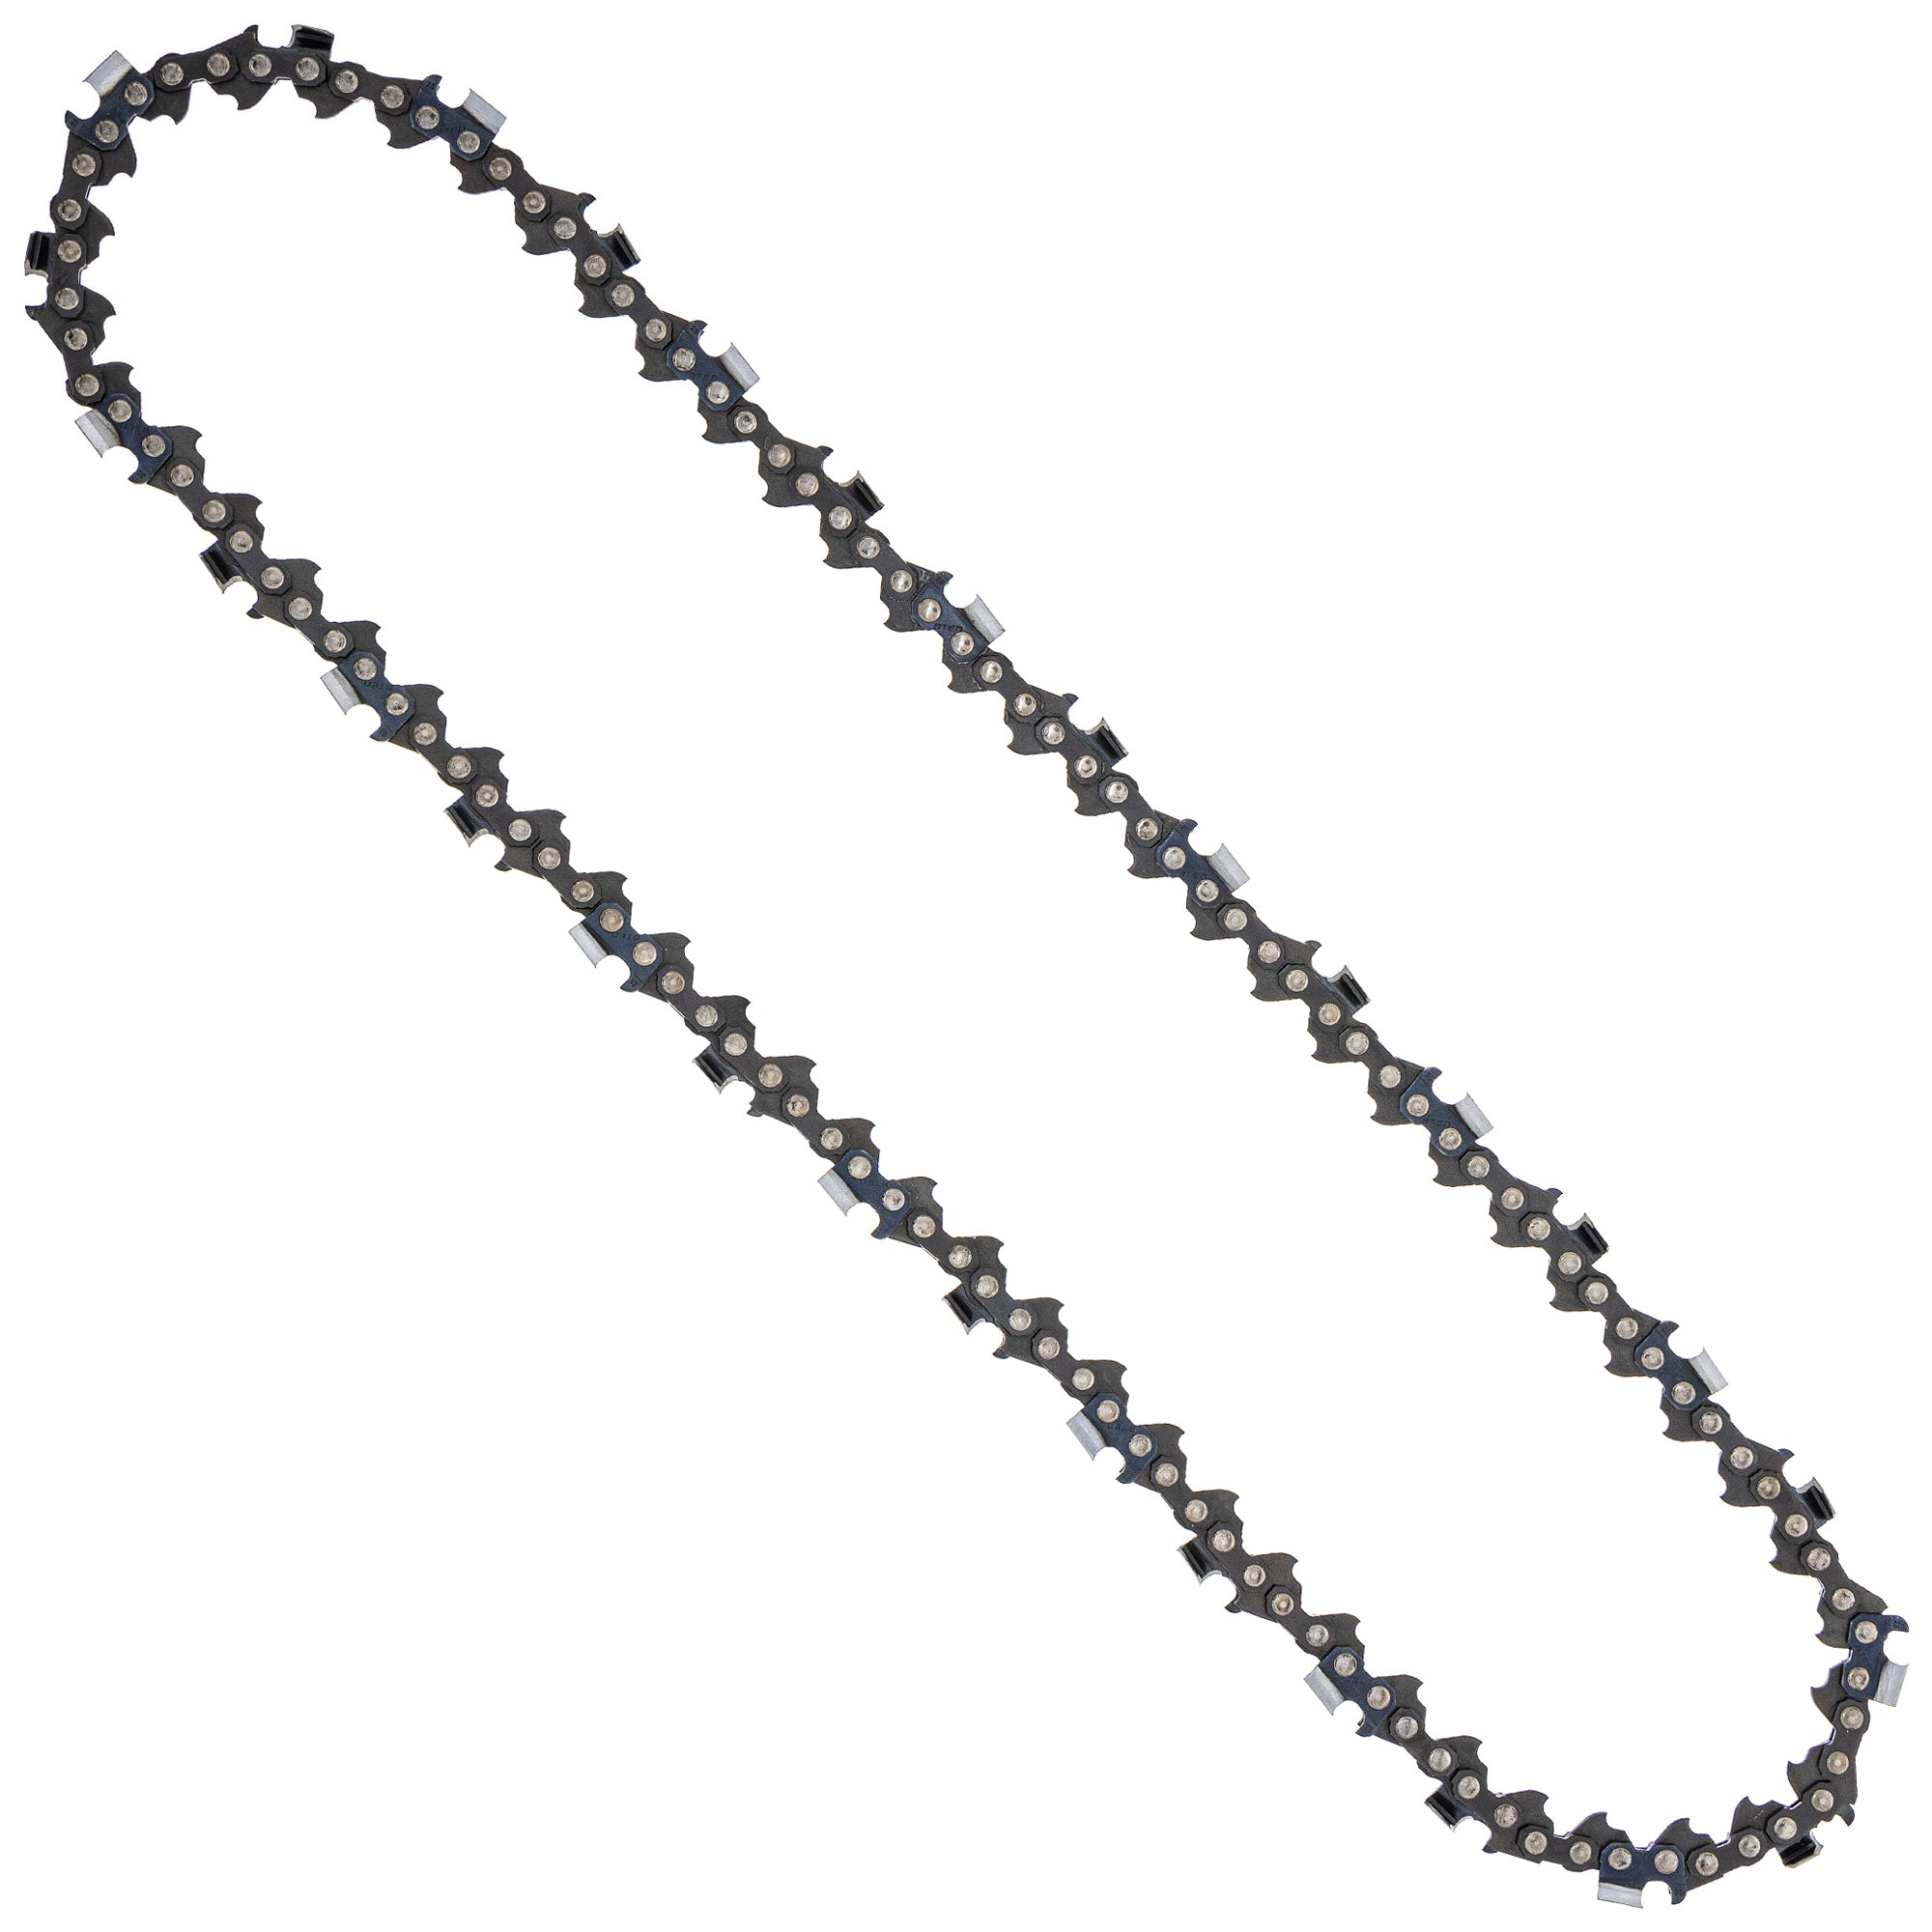 8TEN 810-CCC2360H Chain 3-Pack for zOTHER Oregon Husqvarna Poulan